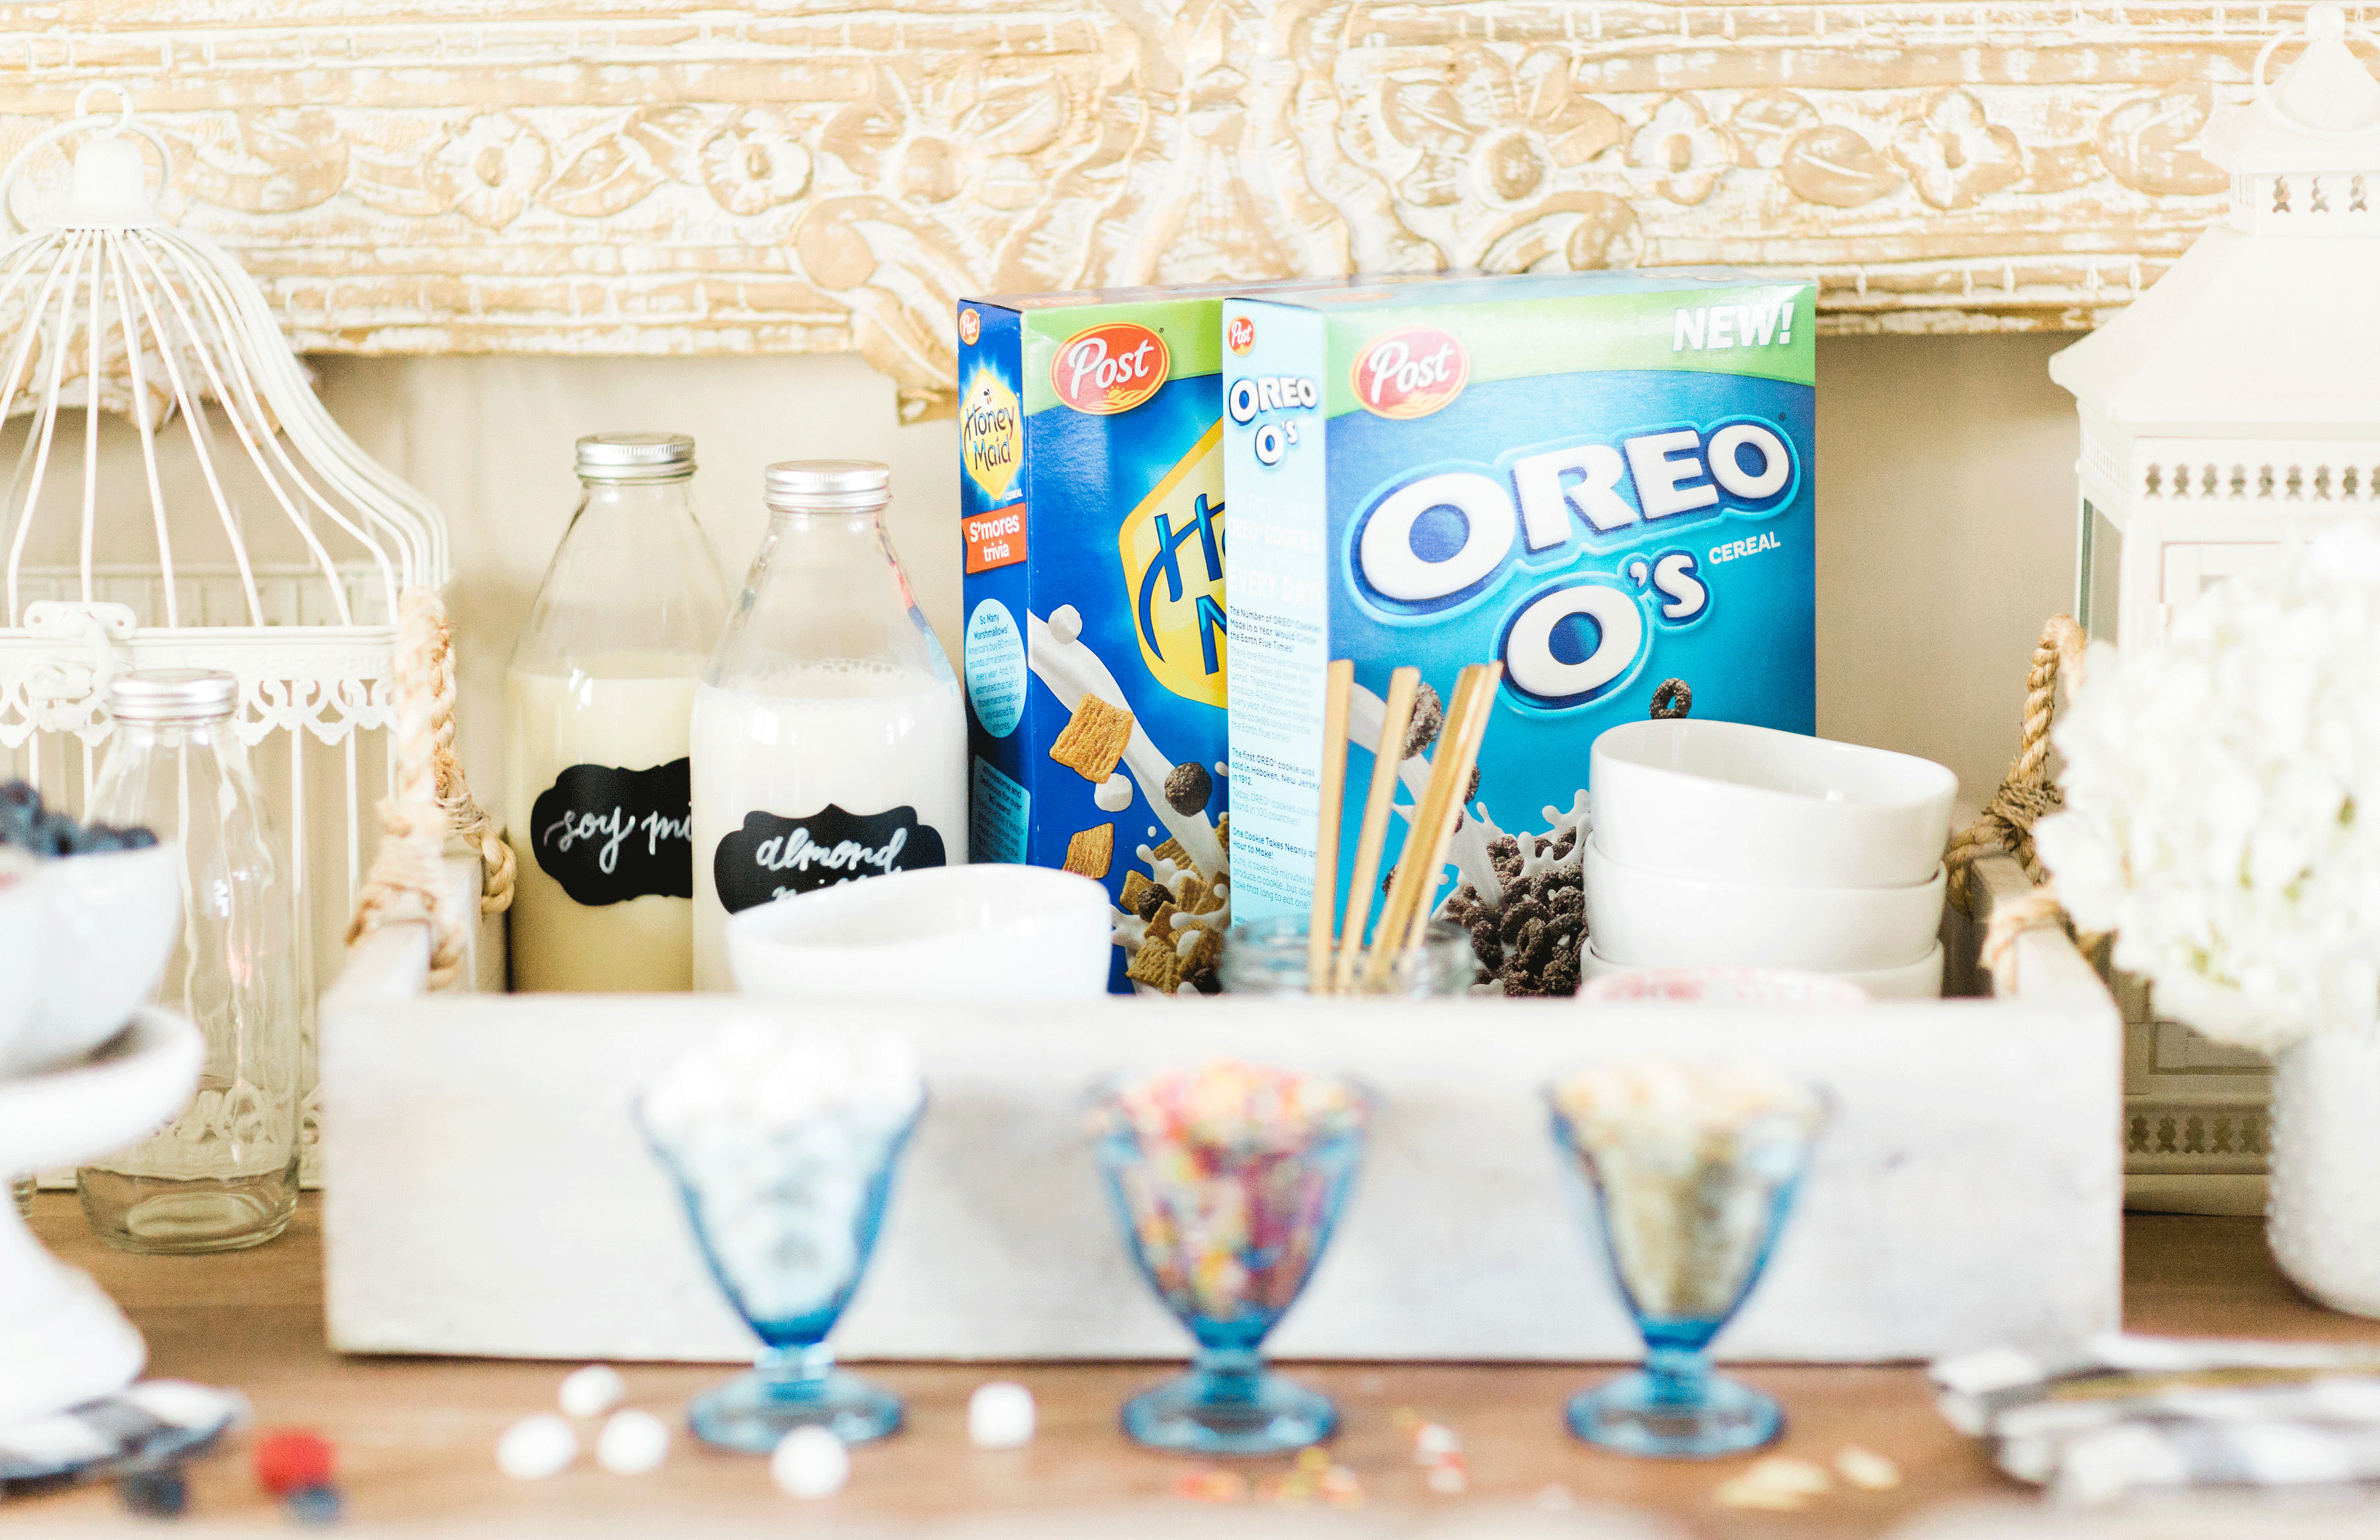 Looking for a unique and easy party dessert station? We're showing you how to put together a DIY retro cereal bar; perfect for a festive and memorable brunch, throwback party, pajama-themed soirée, or sleepover for your kids and their friends! Click through for the details. #brunch #brunchideas #cerealbar #cerealstation #party #partyideas #sleepoverparty #pajamaparty | glitterinc.com | @glitterinc